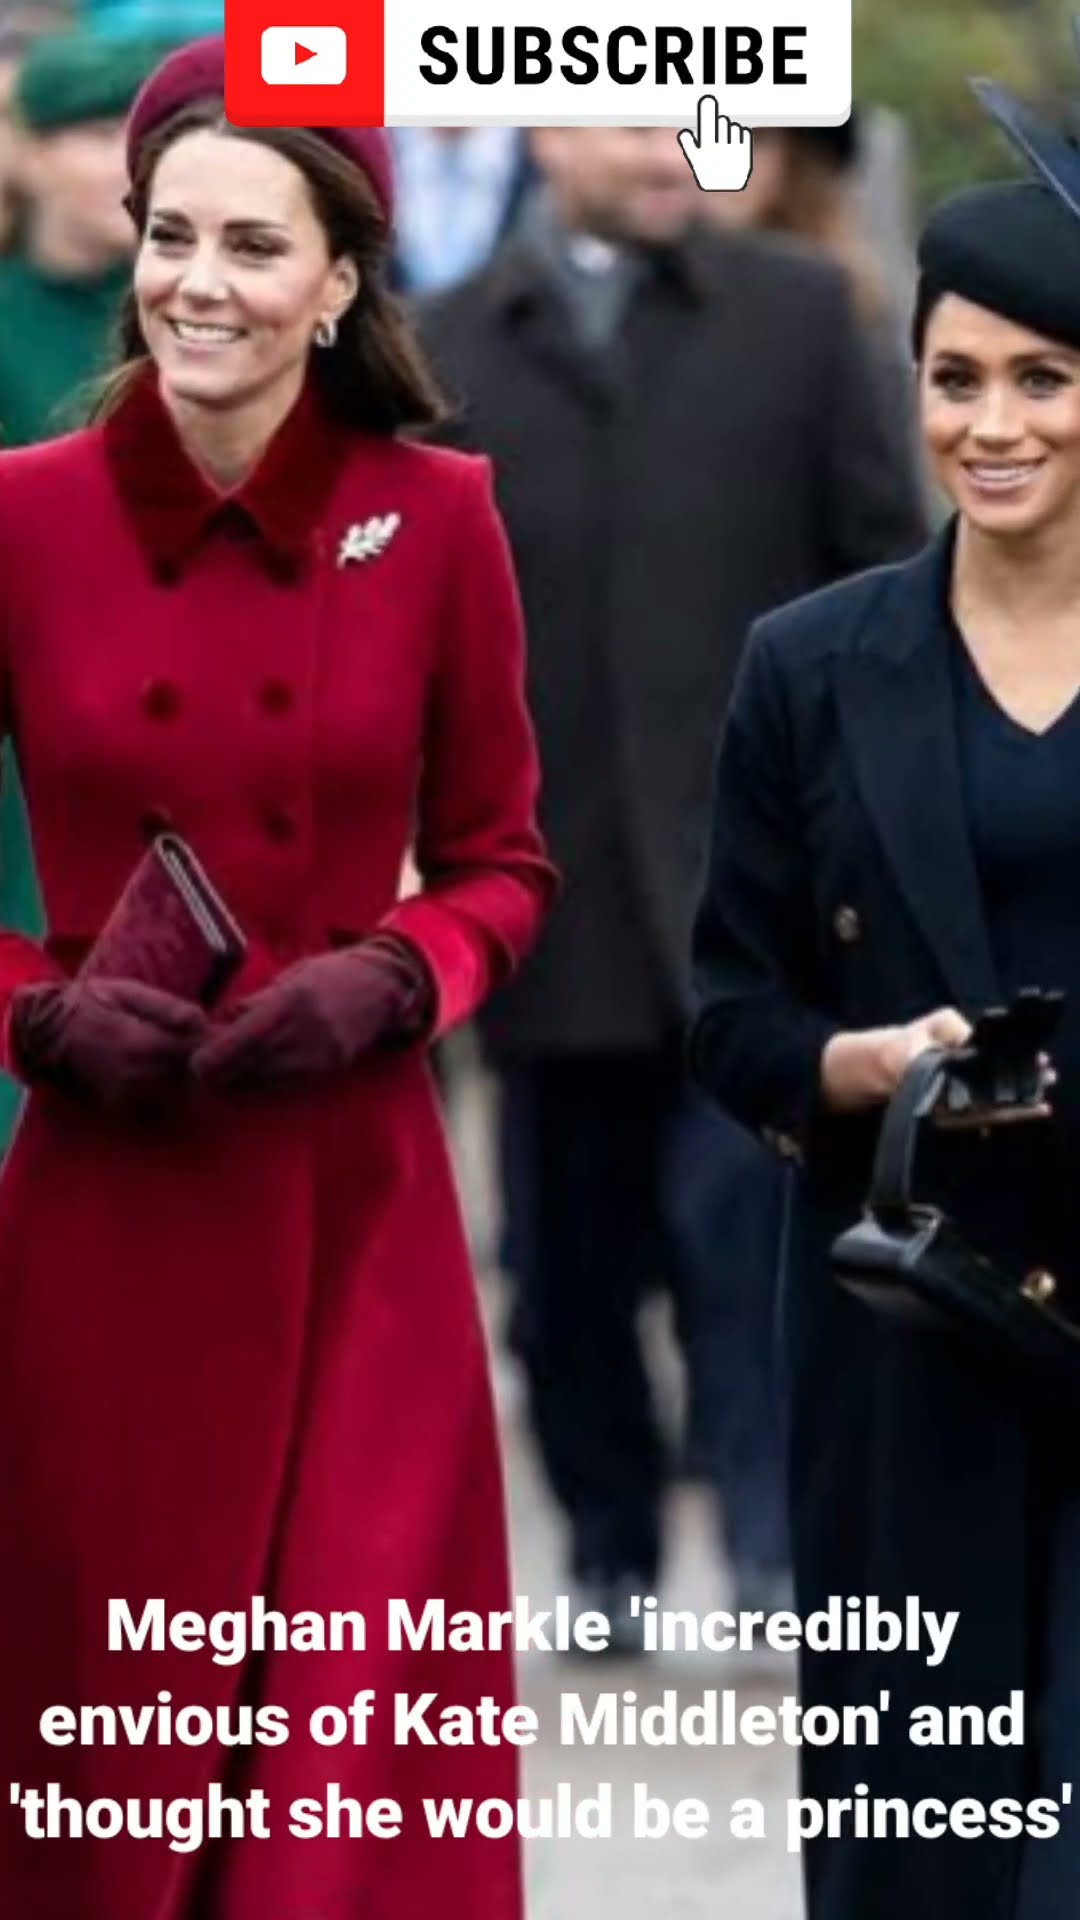 Meghan Markle 'incredibly envious of Kate Middleton' and 'thought she would be a princess'